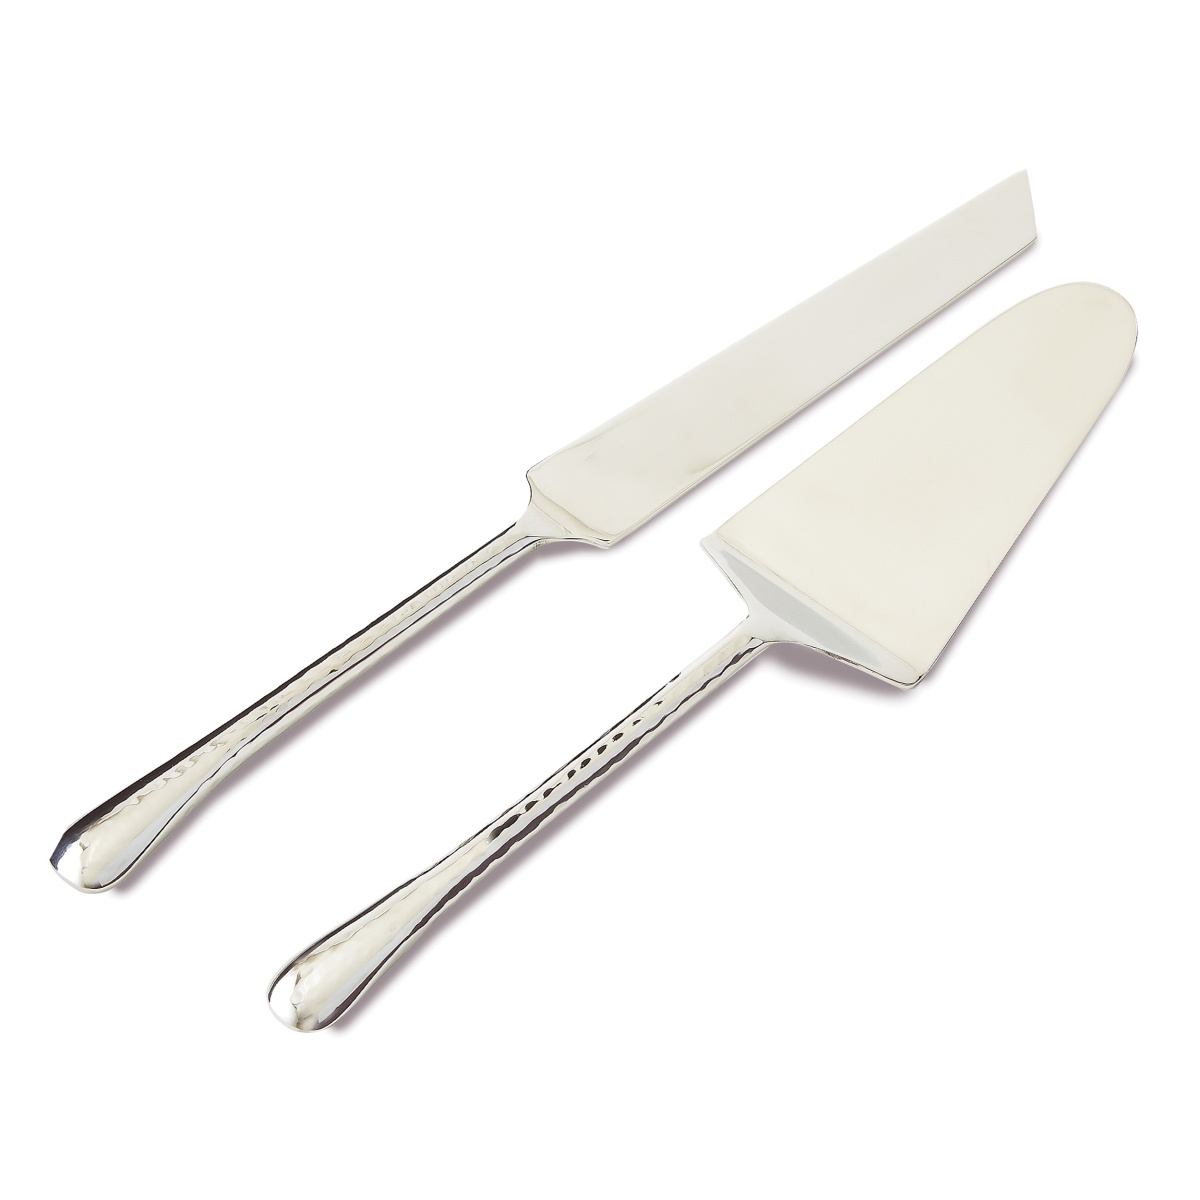 72520 11 In. Hammered Stainless Steel Cake Server Set, Silver